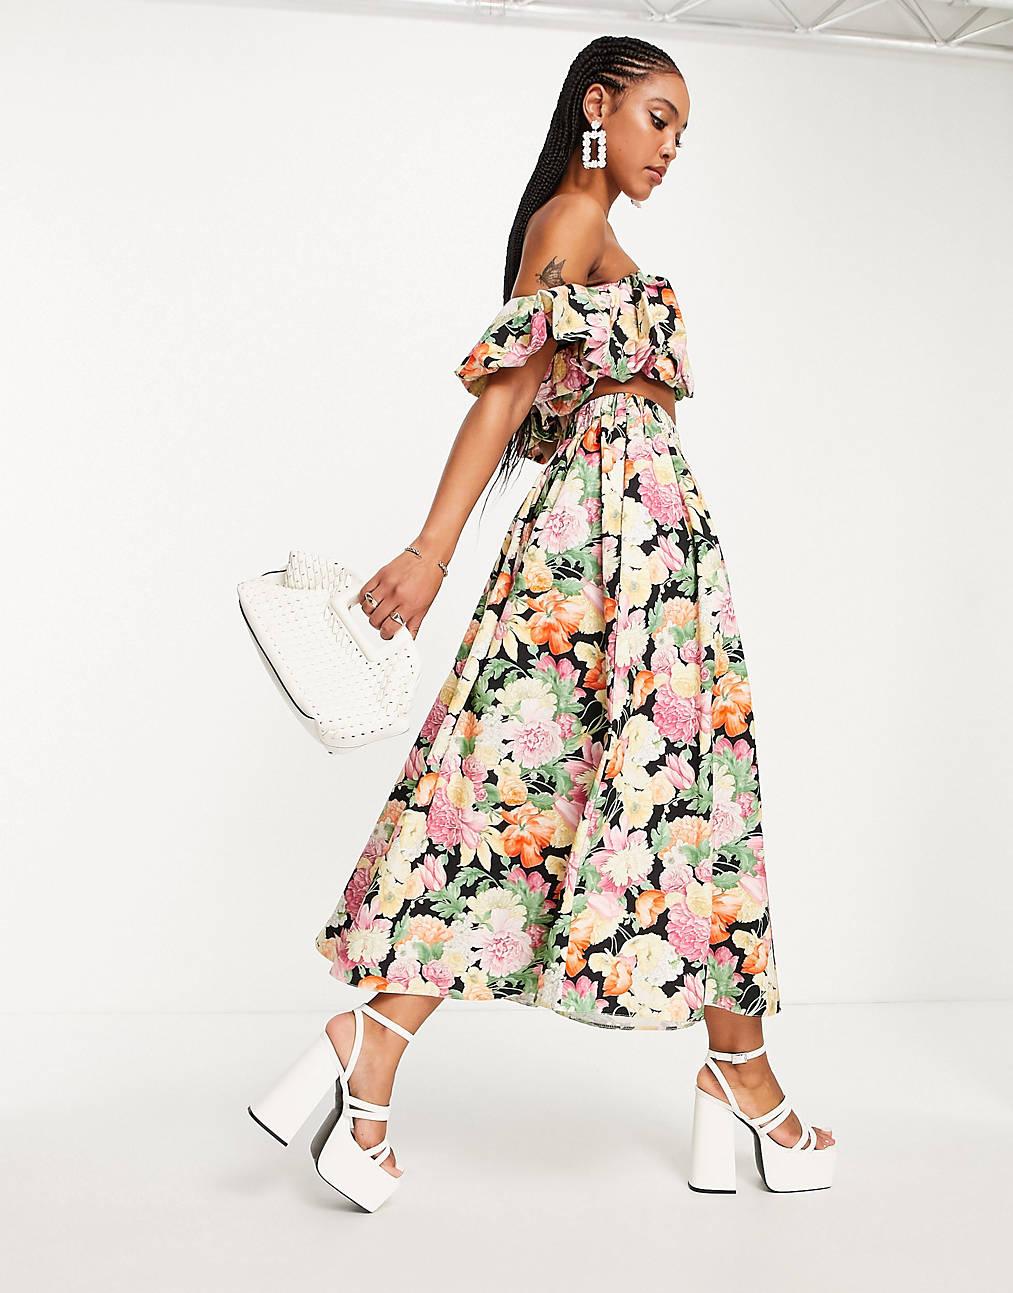 Spring Wedding Guest Dresses: 26 of the Prettiest Picks -  